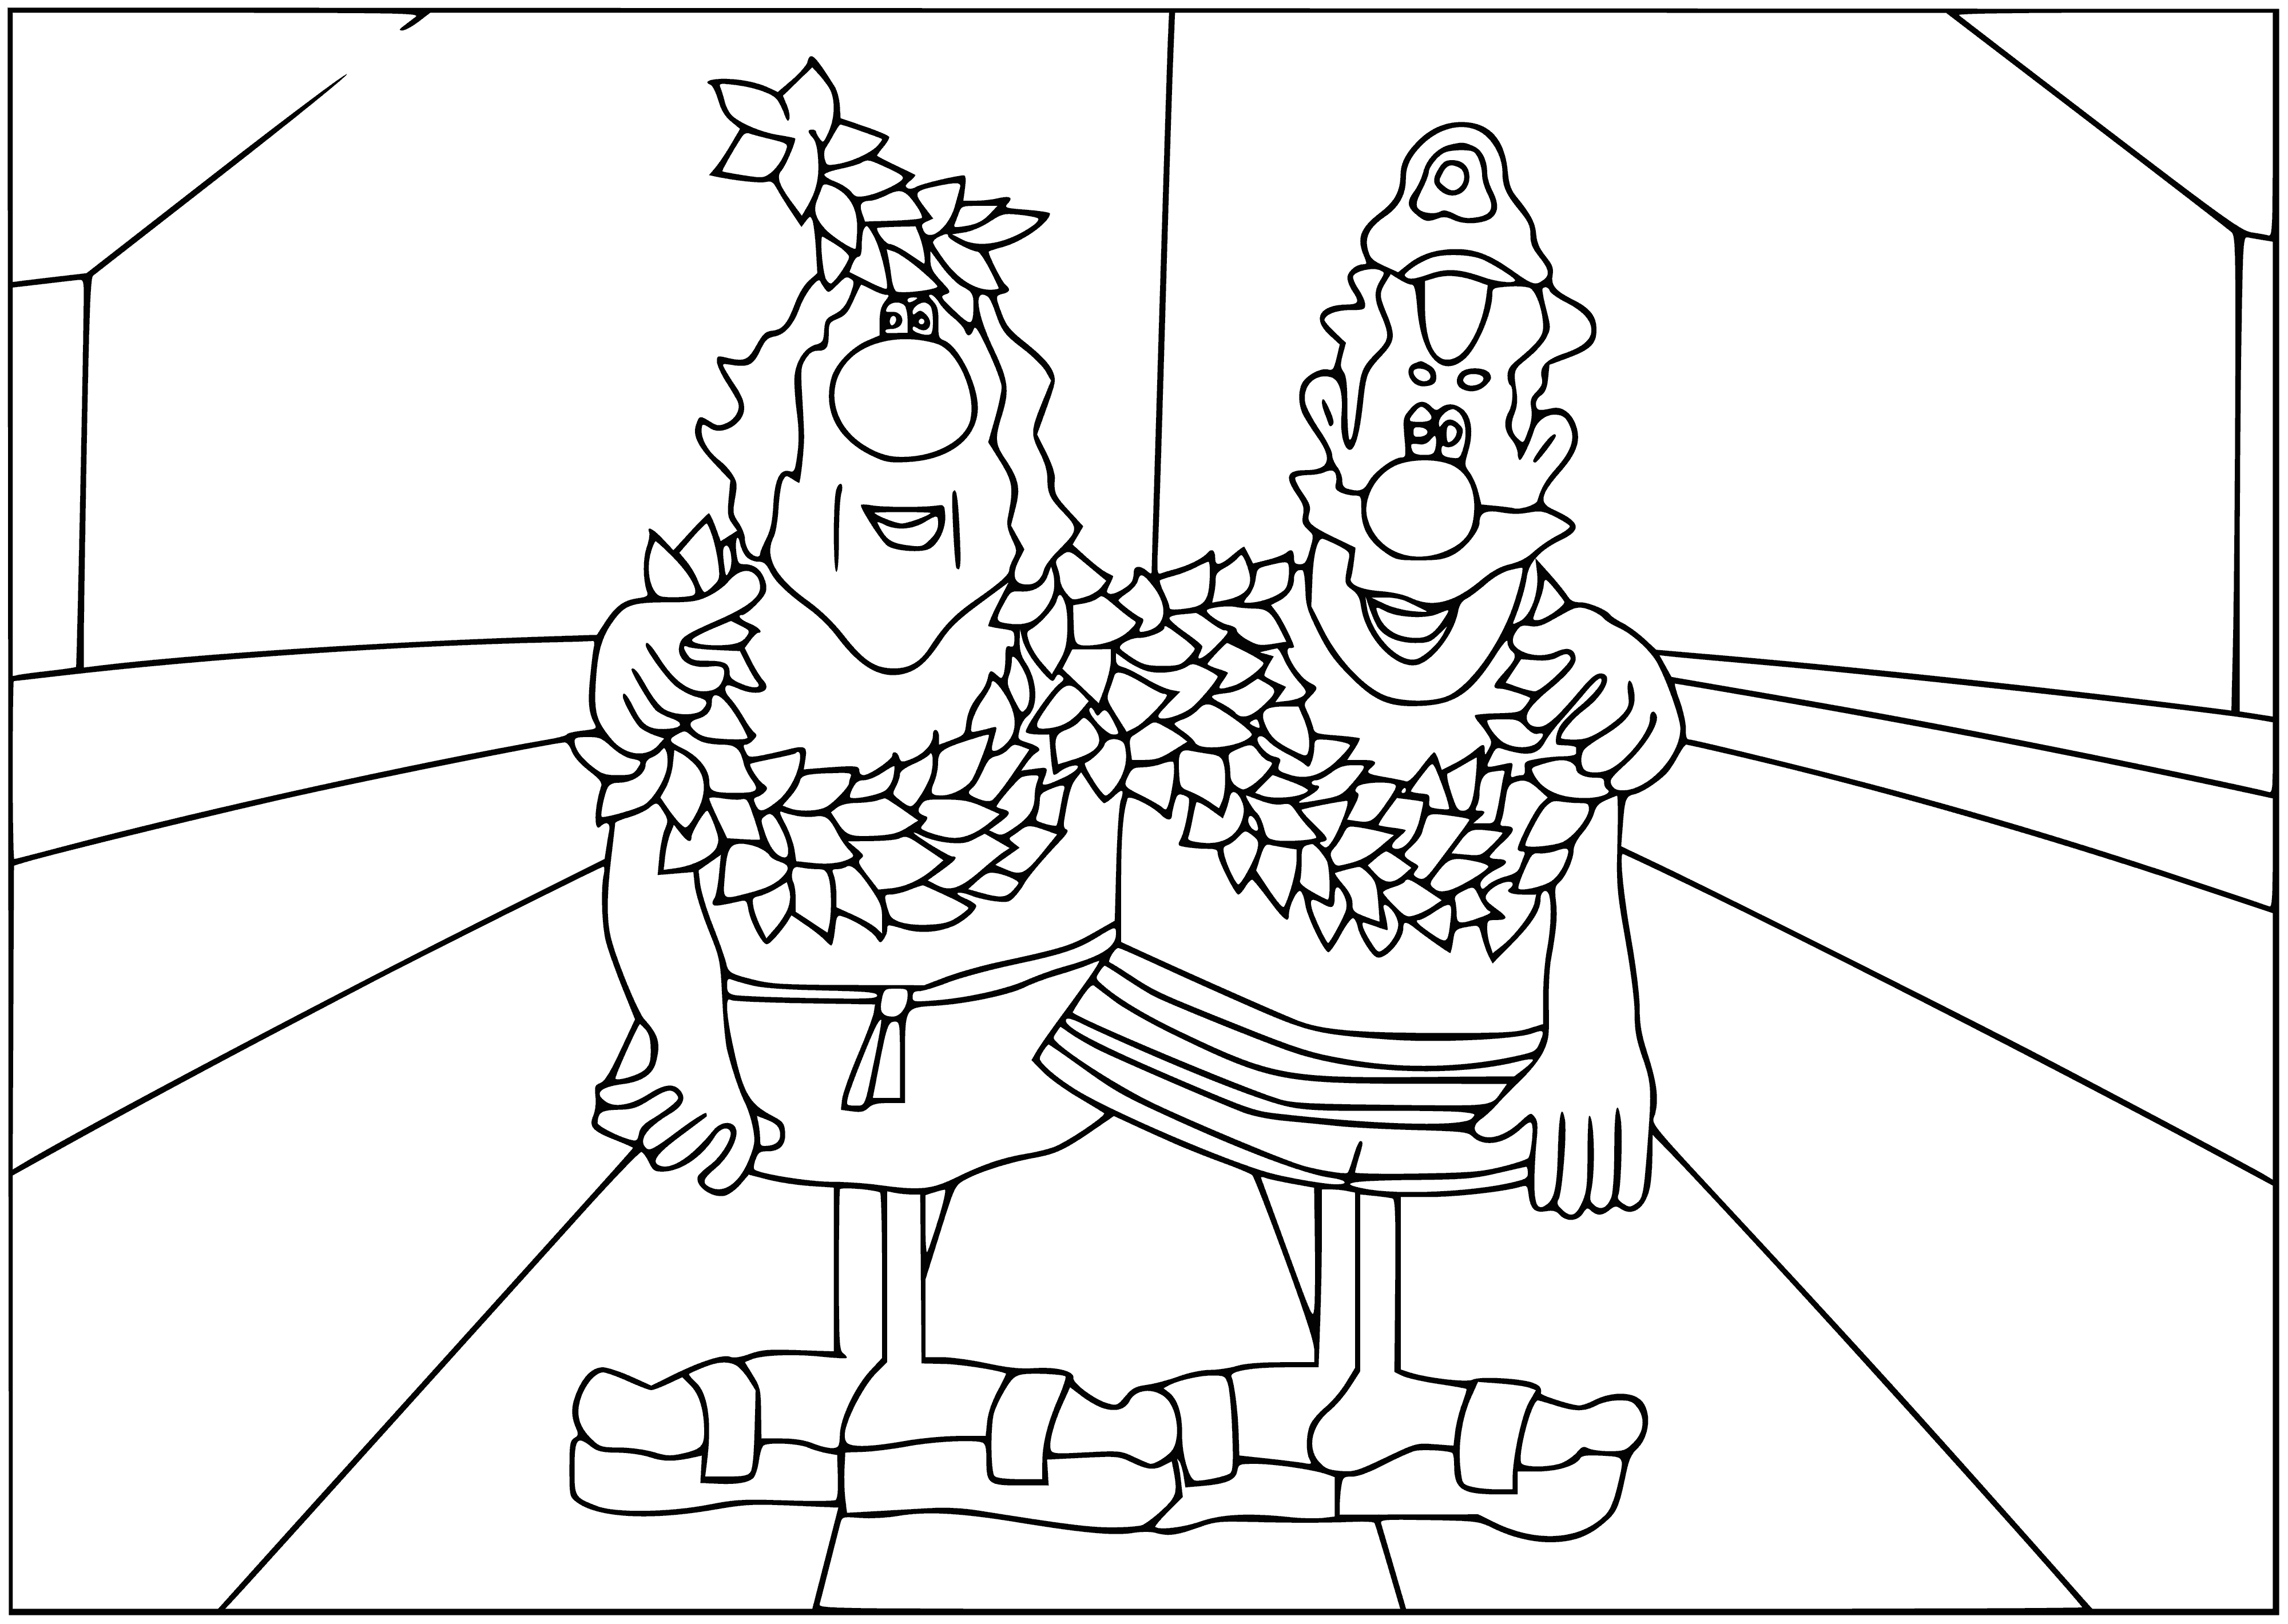 coloring page: Two elderly men aboard a ship-one in red, one in blue.